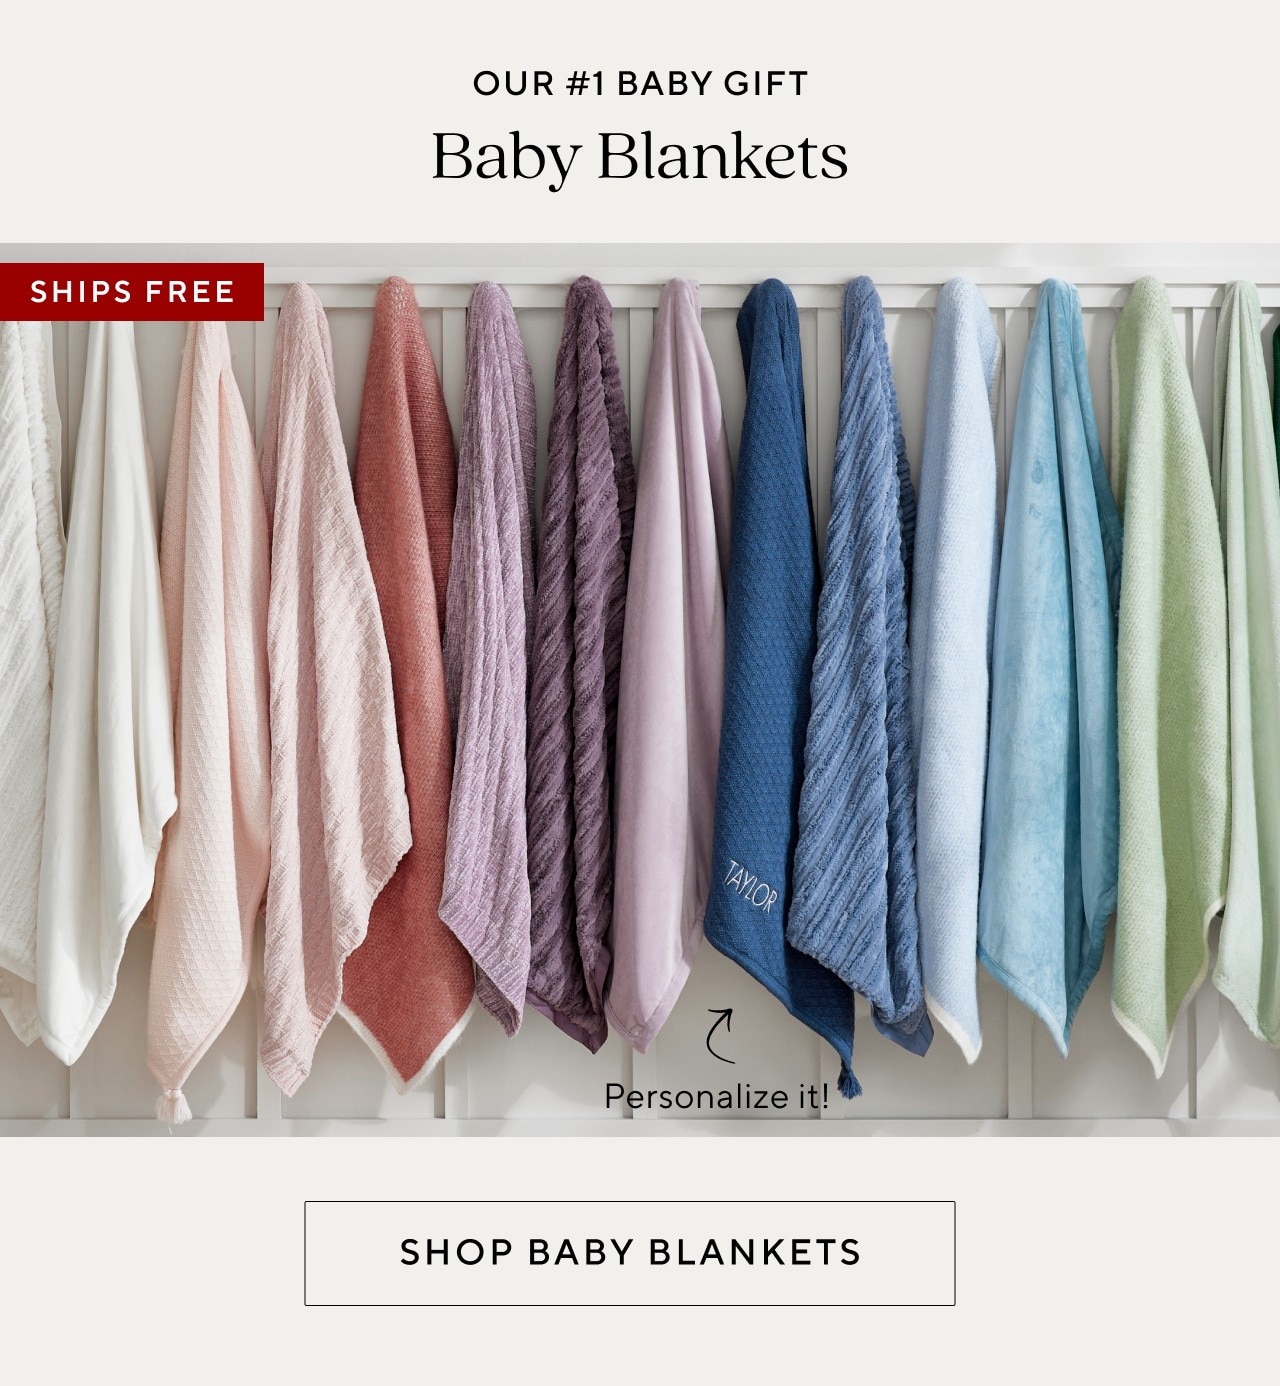 OUR #1 BABY GIFT - BABY BLANKETS